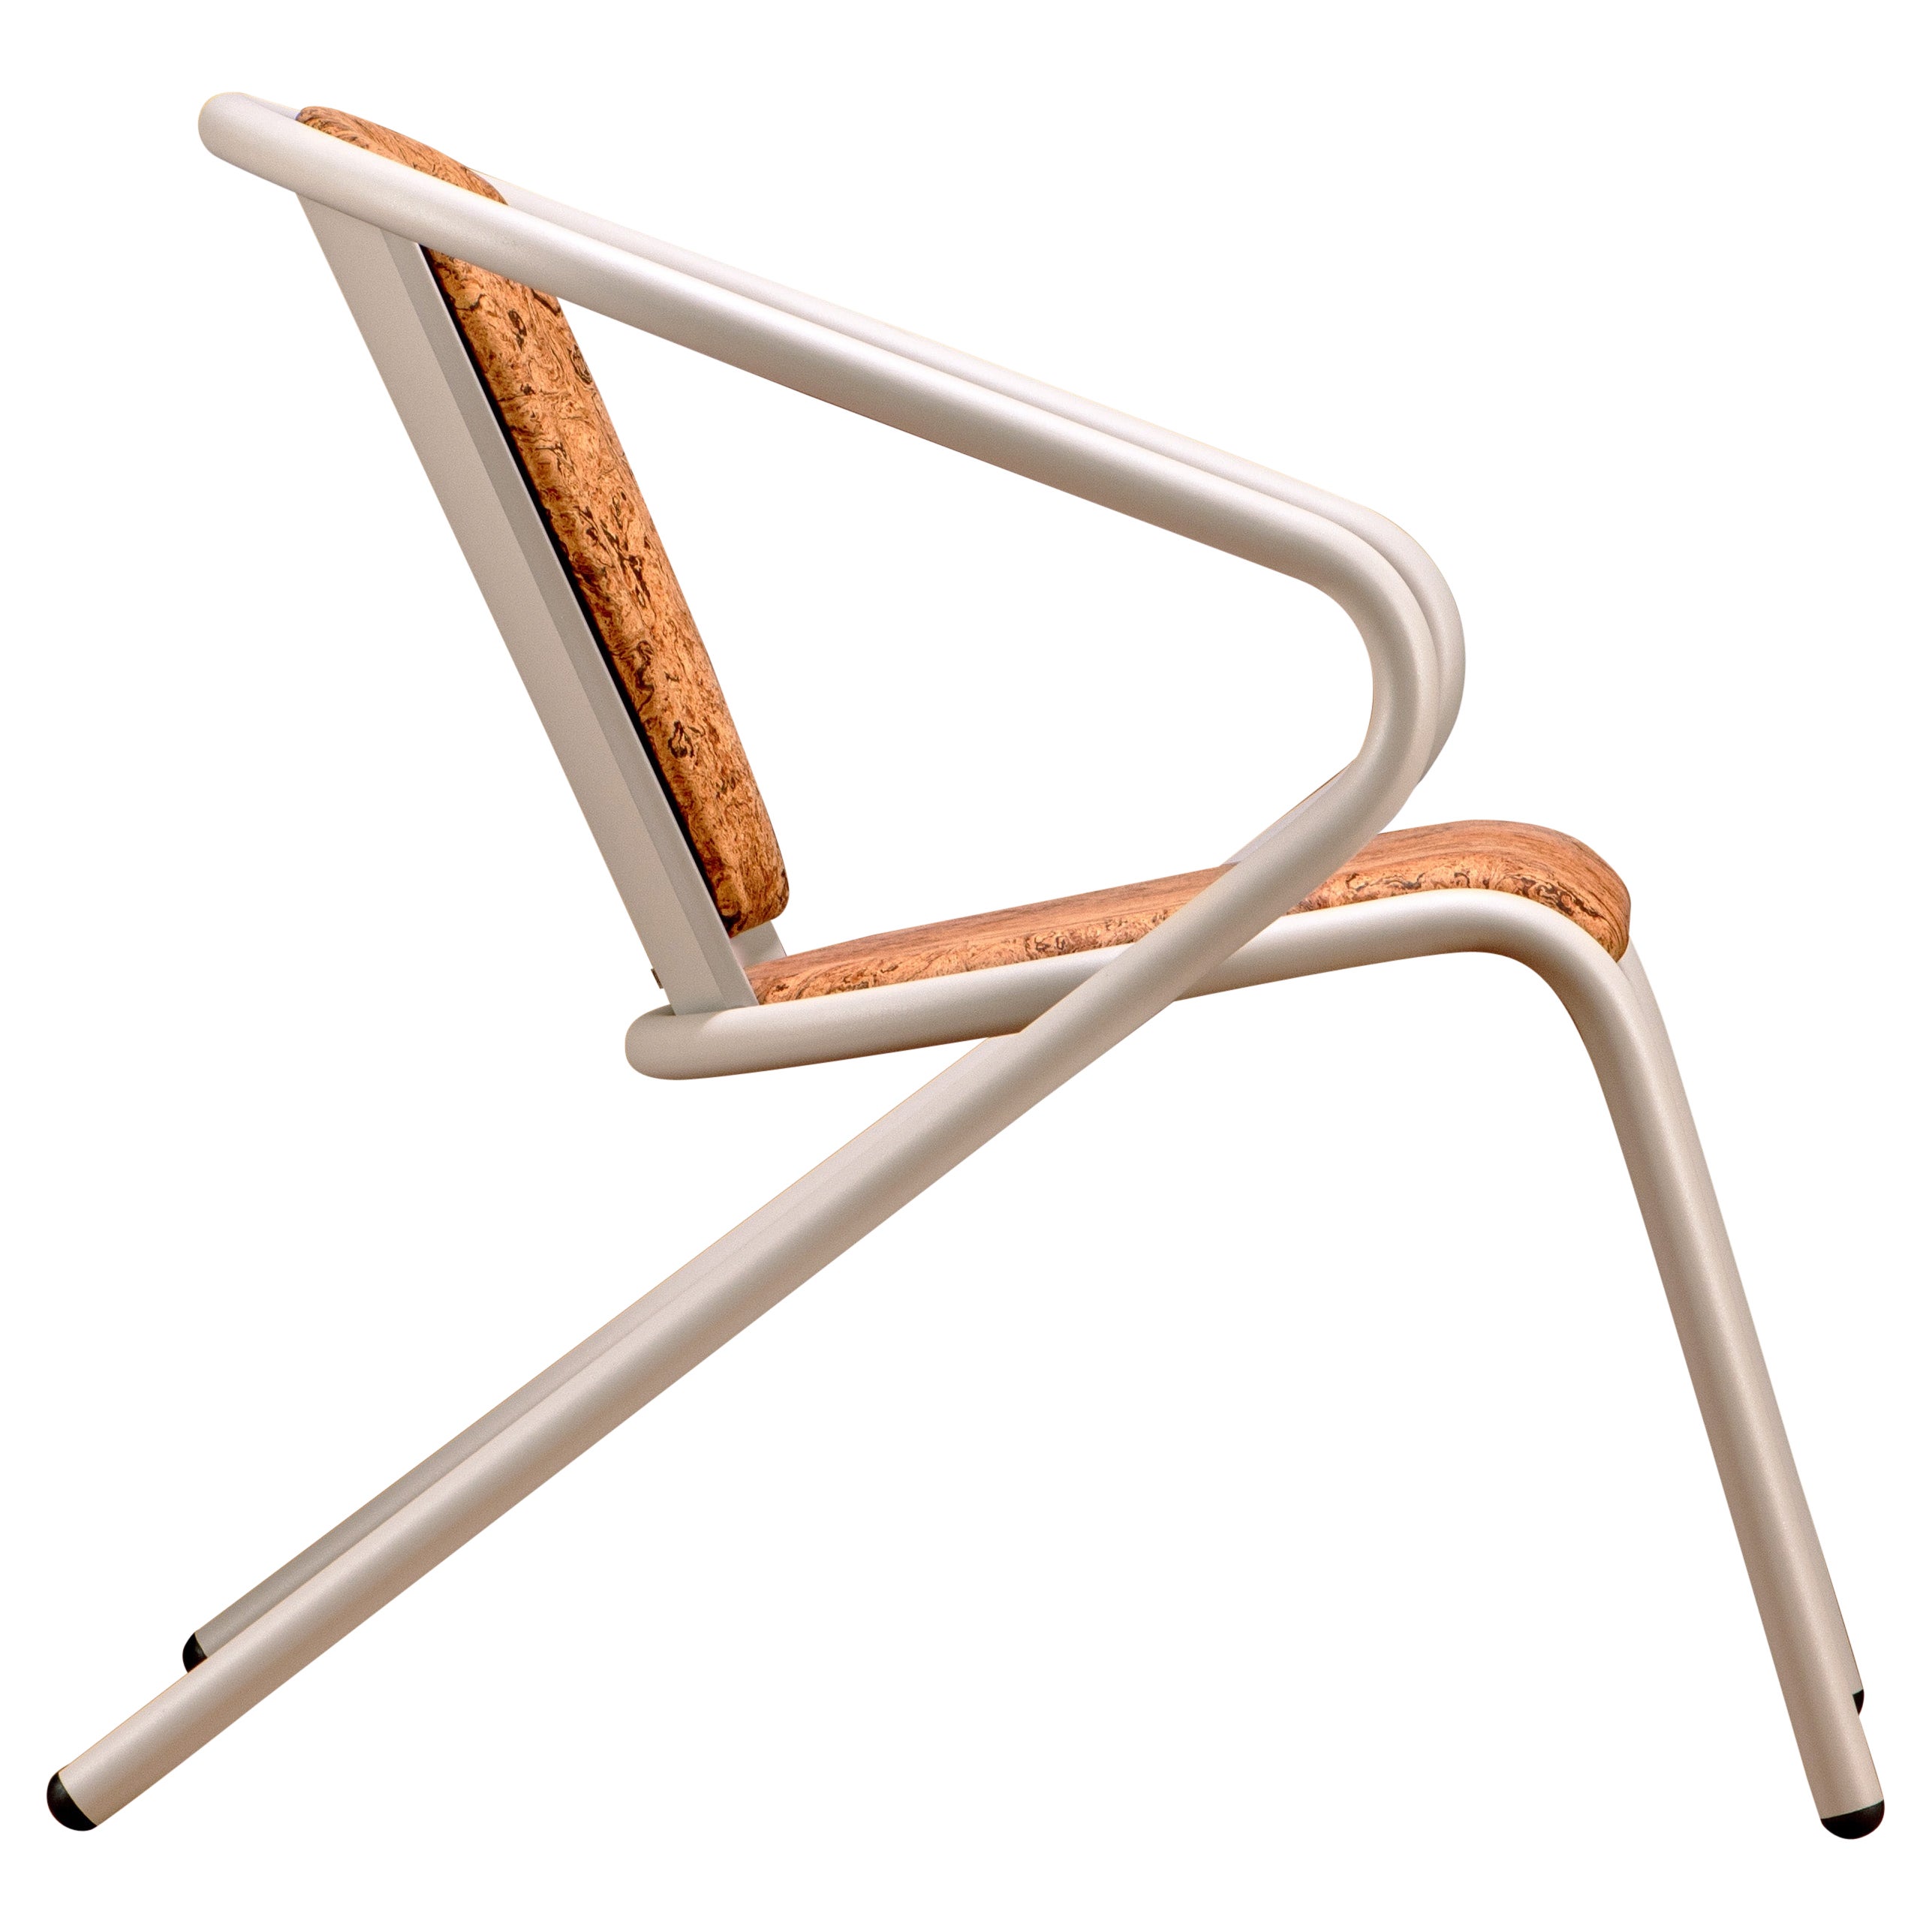 Bicalounge Modern Steel Lounge Chair Champagne, Upholstery in Natural Cork